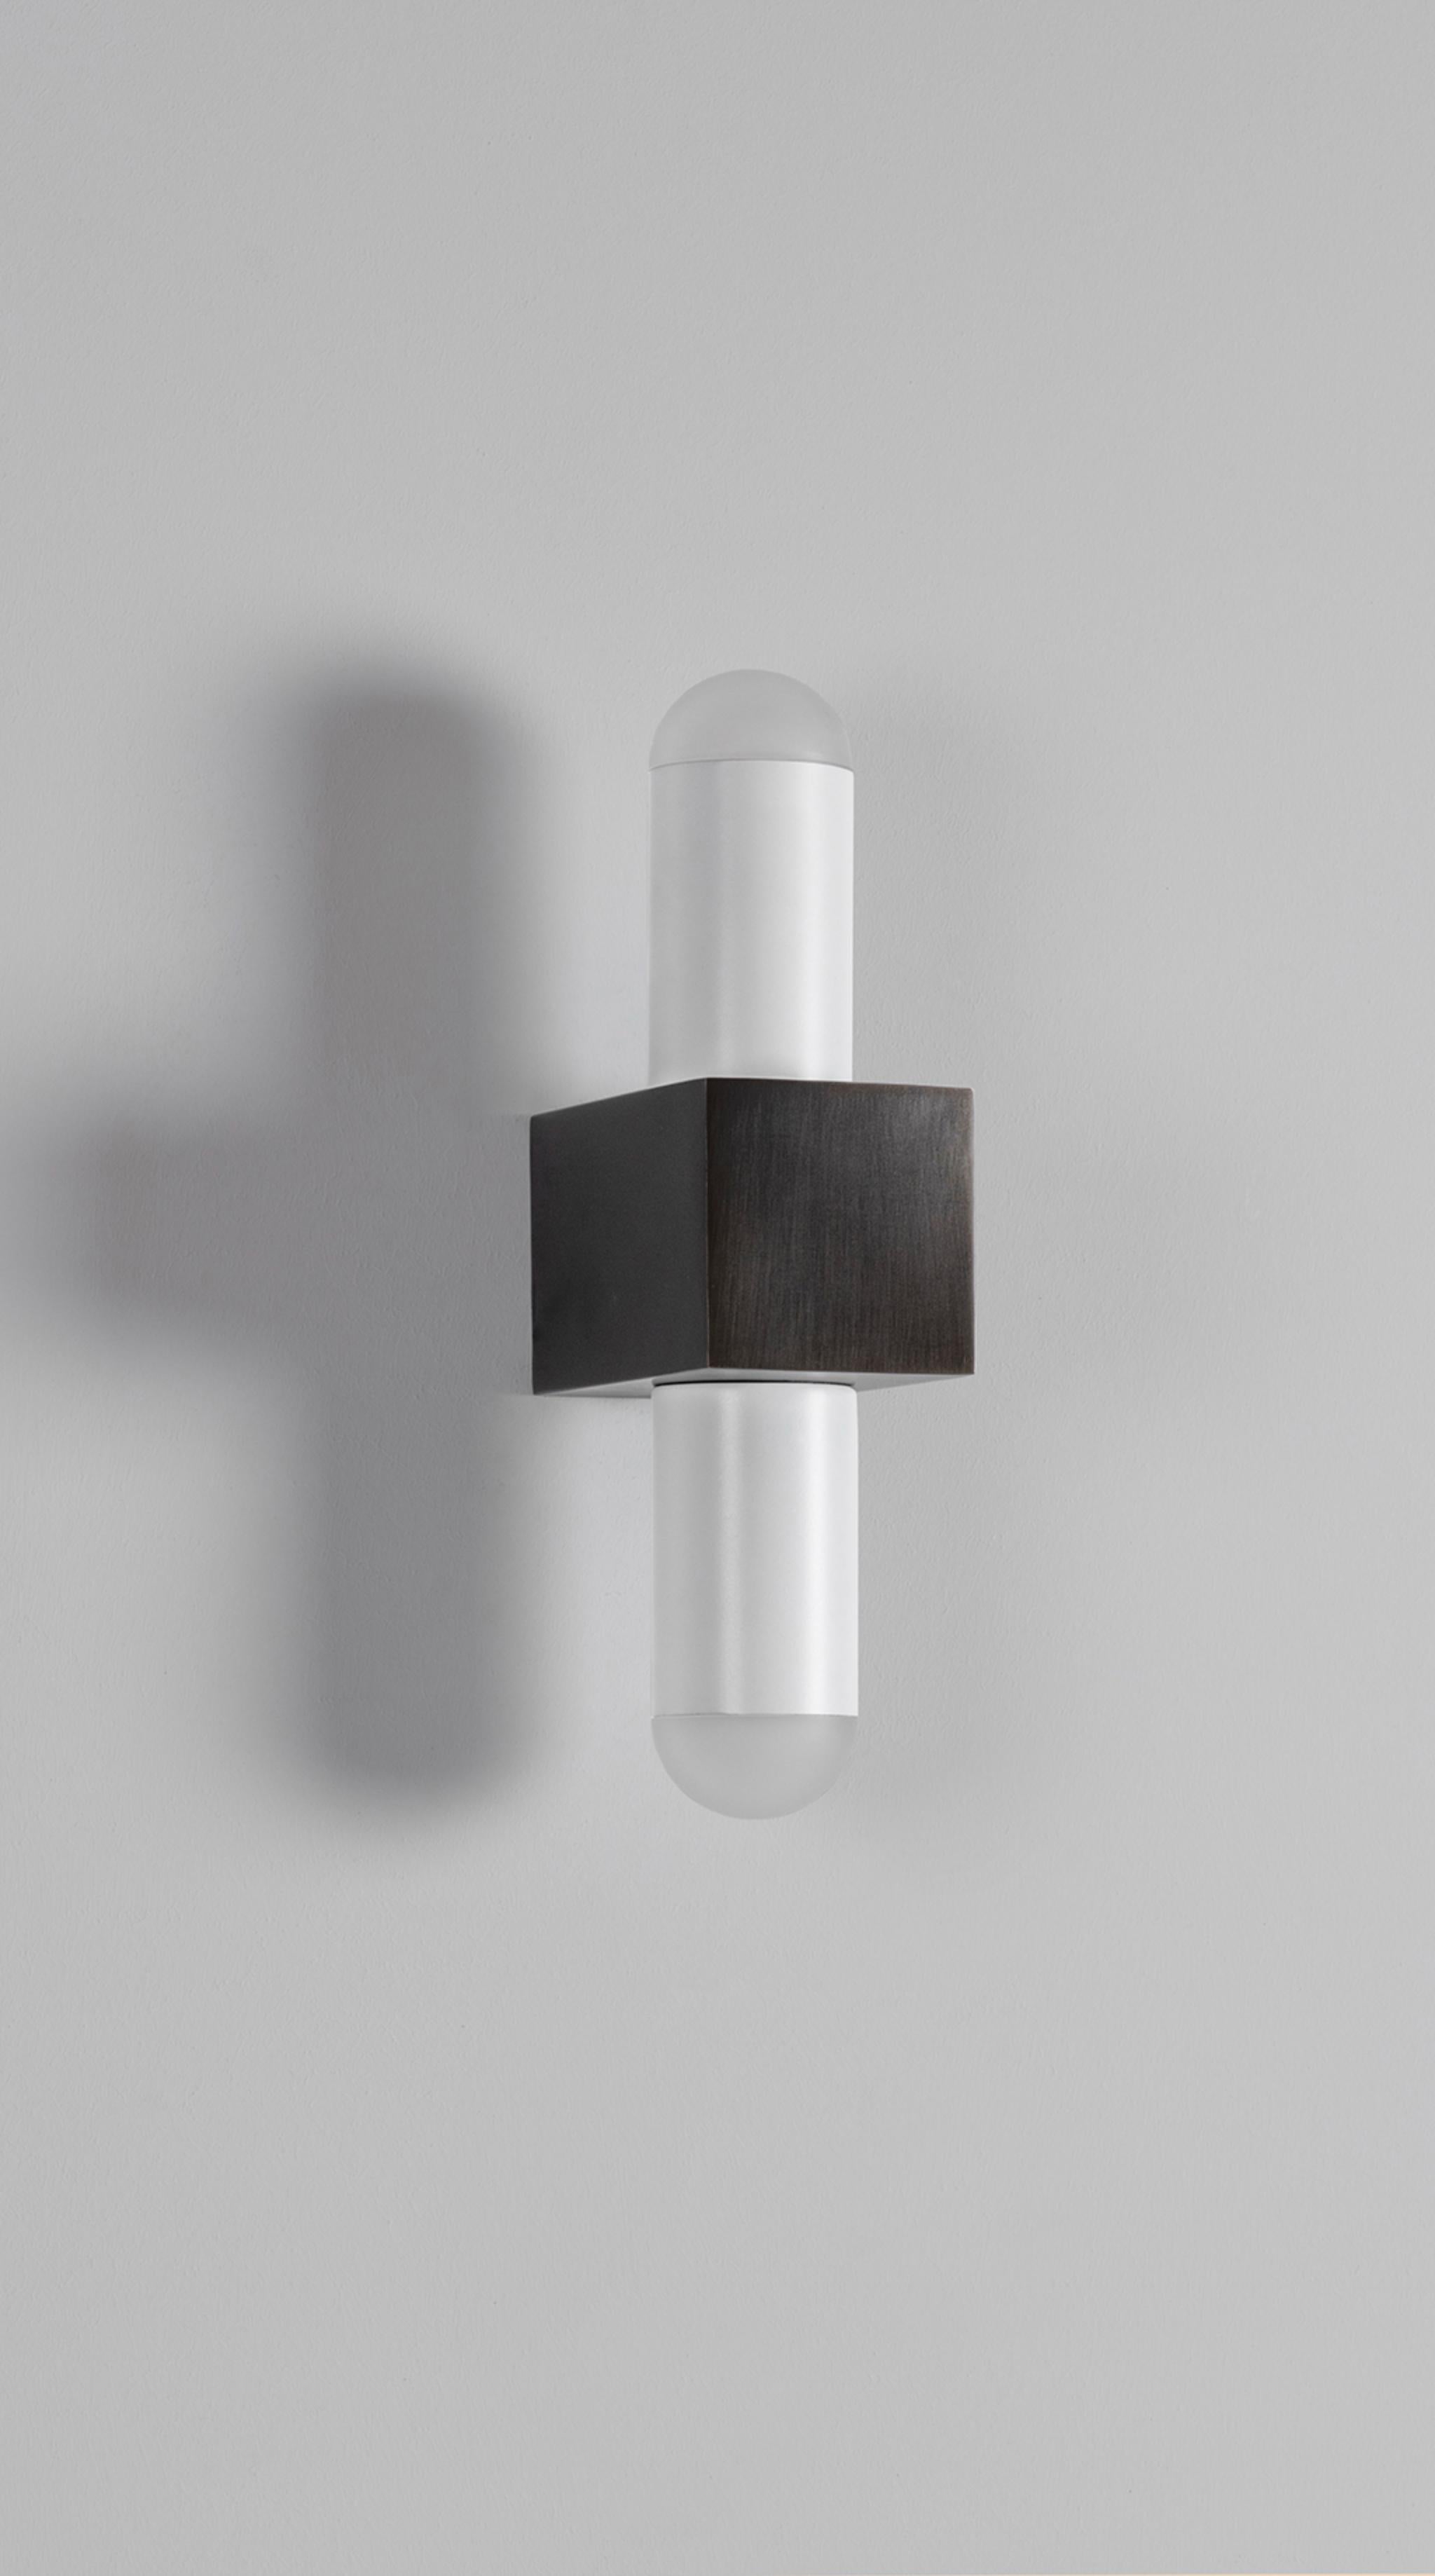 Block wall lamp by Square in Circle, 2022
Dimensions: W 7 x H 28 cm
Projection: 11.5 cm
Materials: Dark bronze, opaque glass, powder coated matt white

A clean and simple wall light inspired by the Bauhaus approach, which focuses on geometric